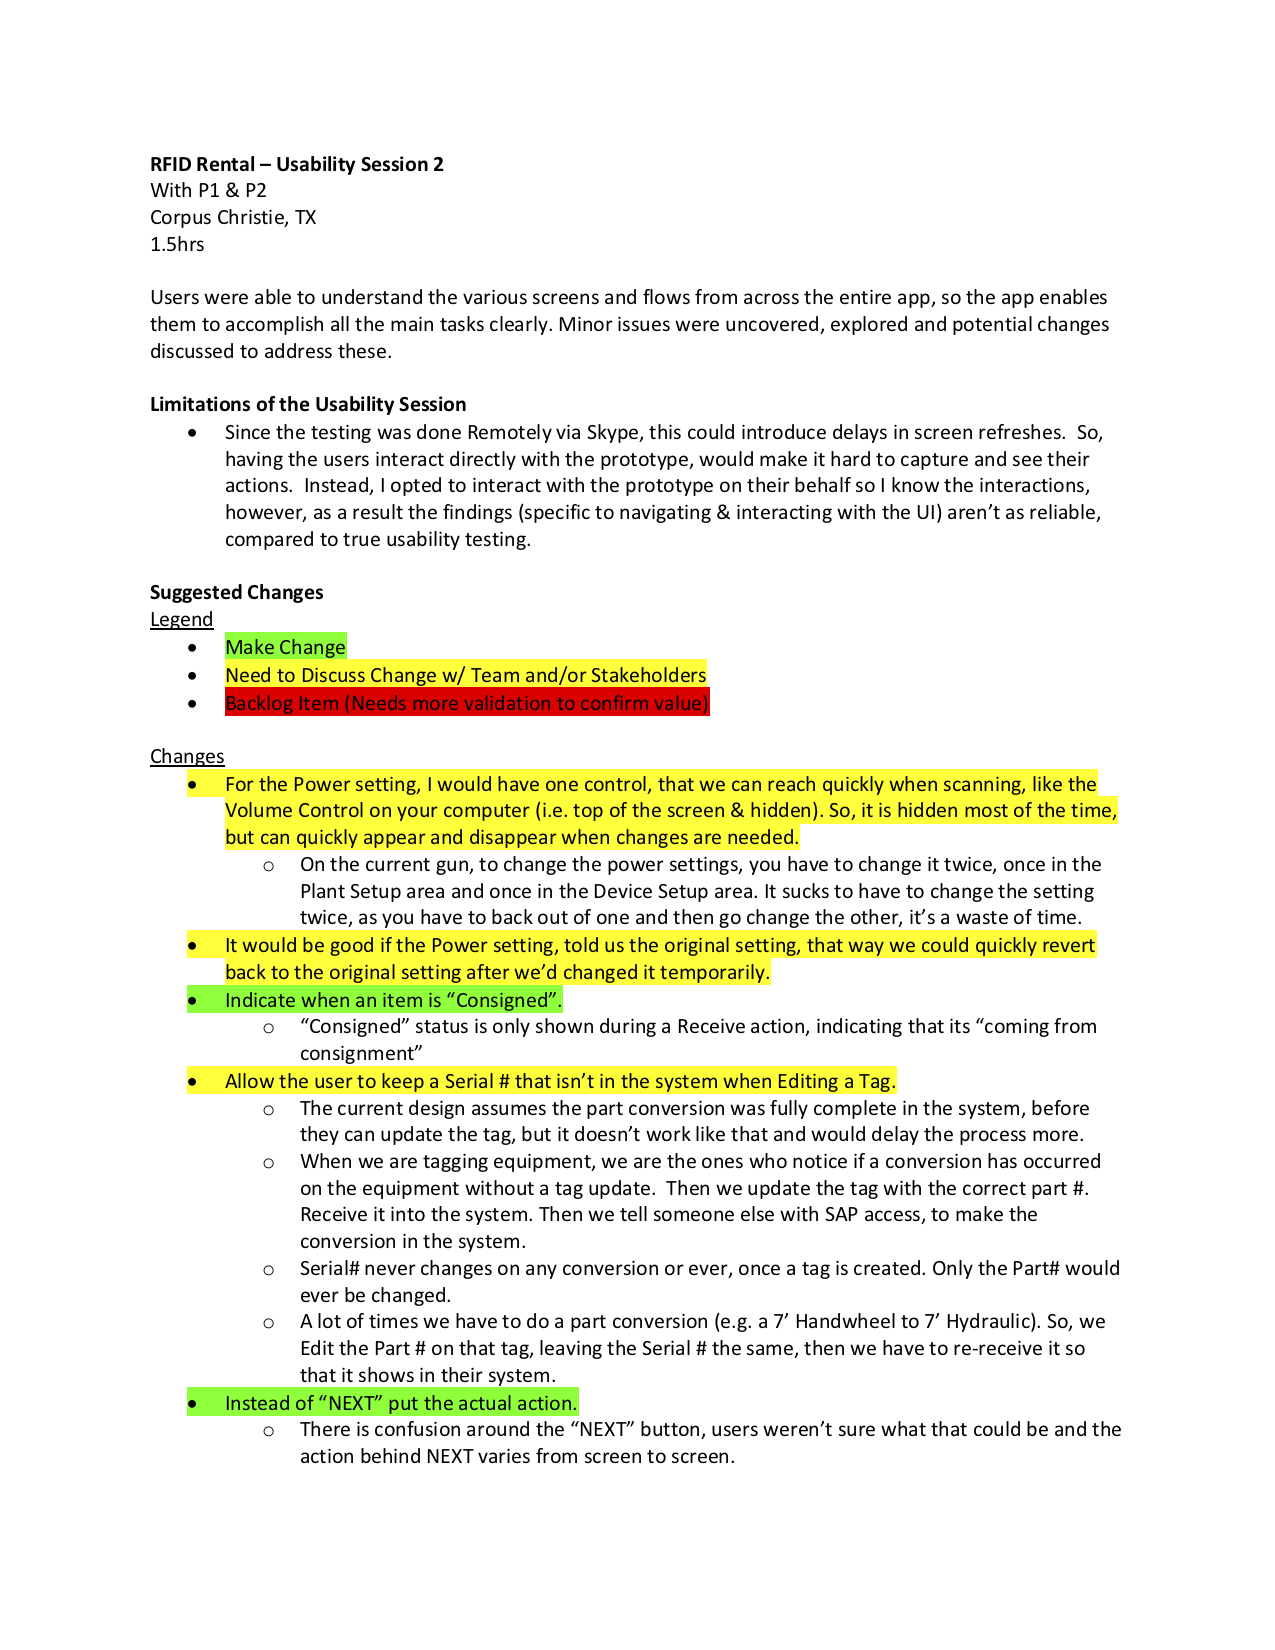 Usability Session - Synthesis - Page 1